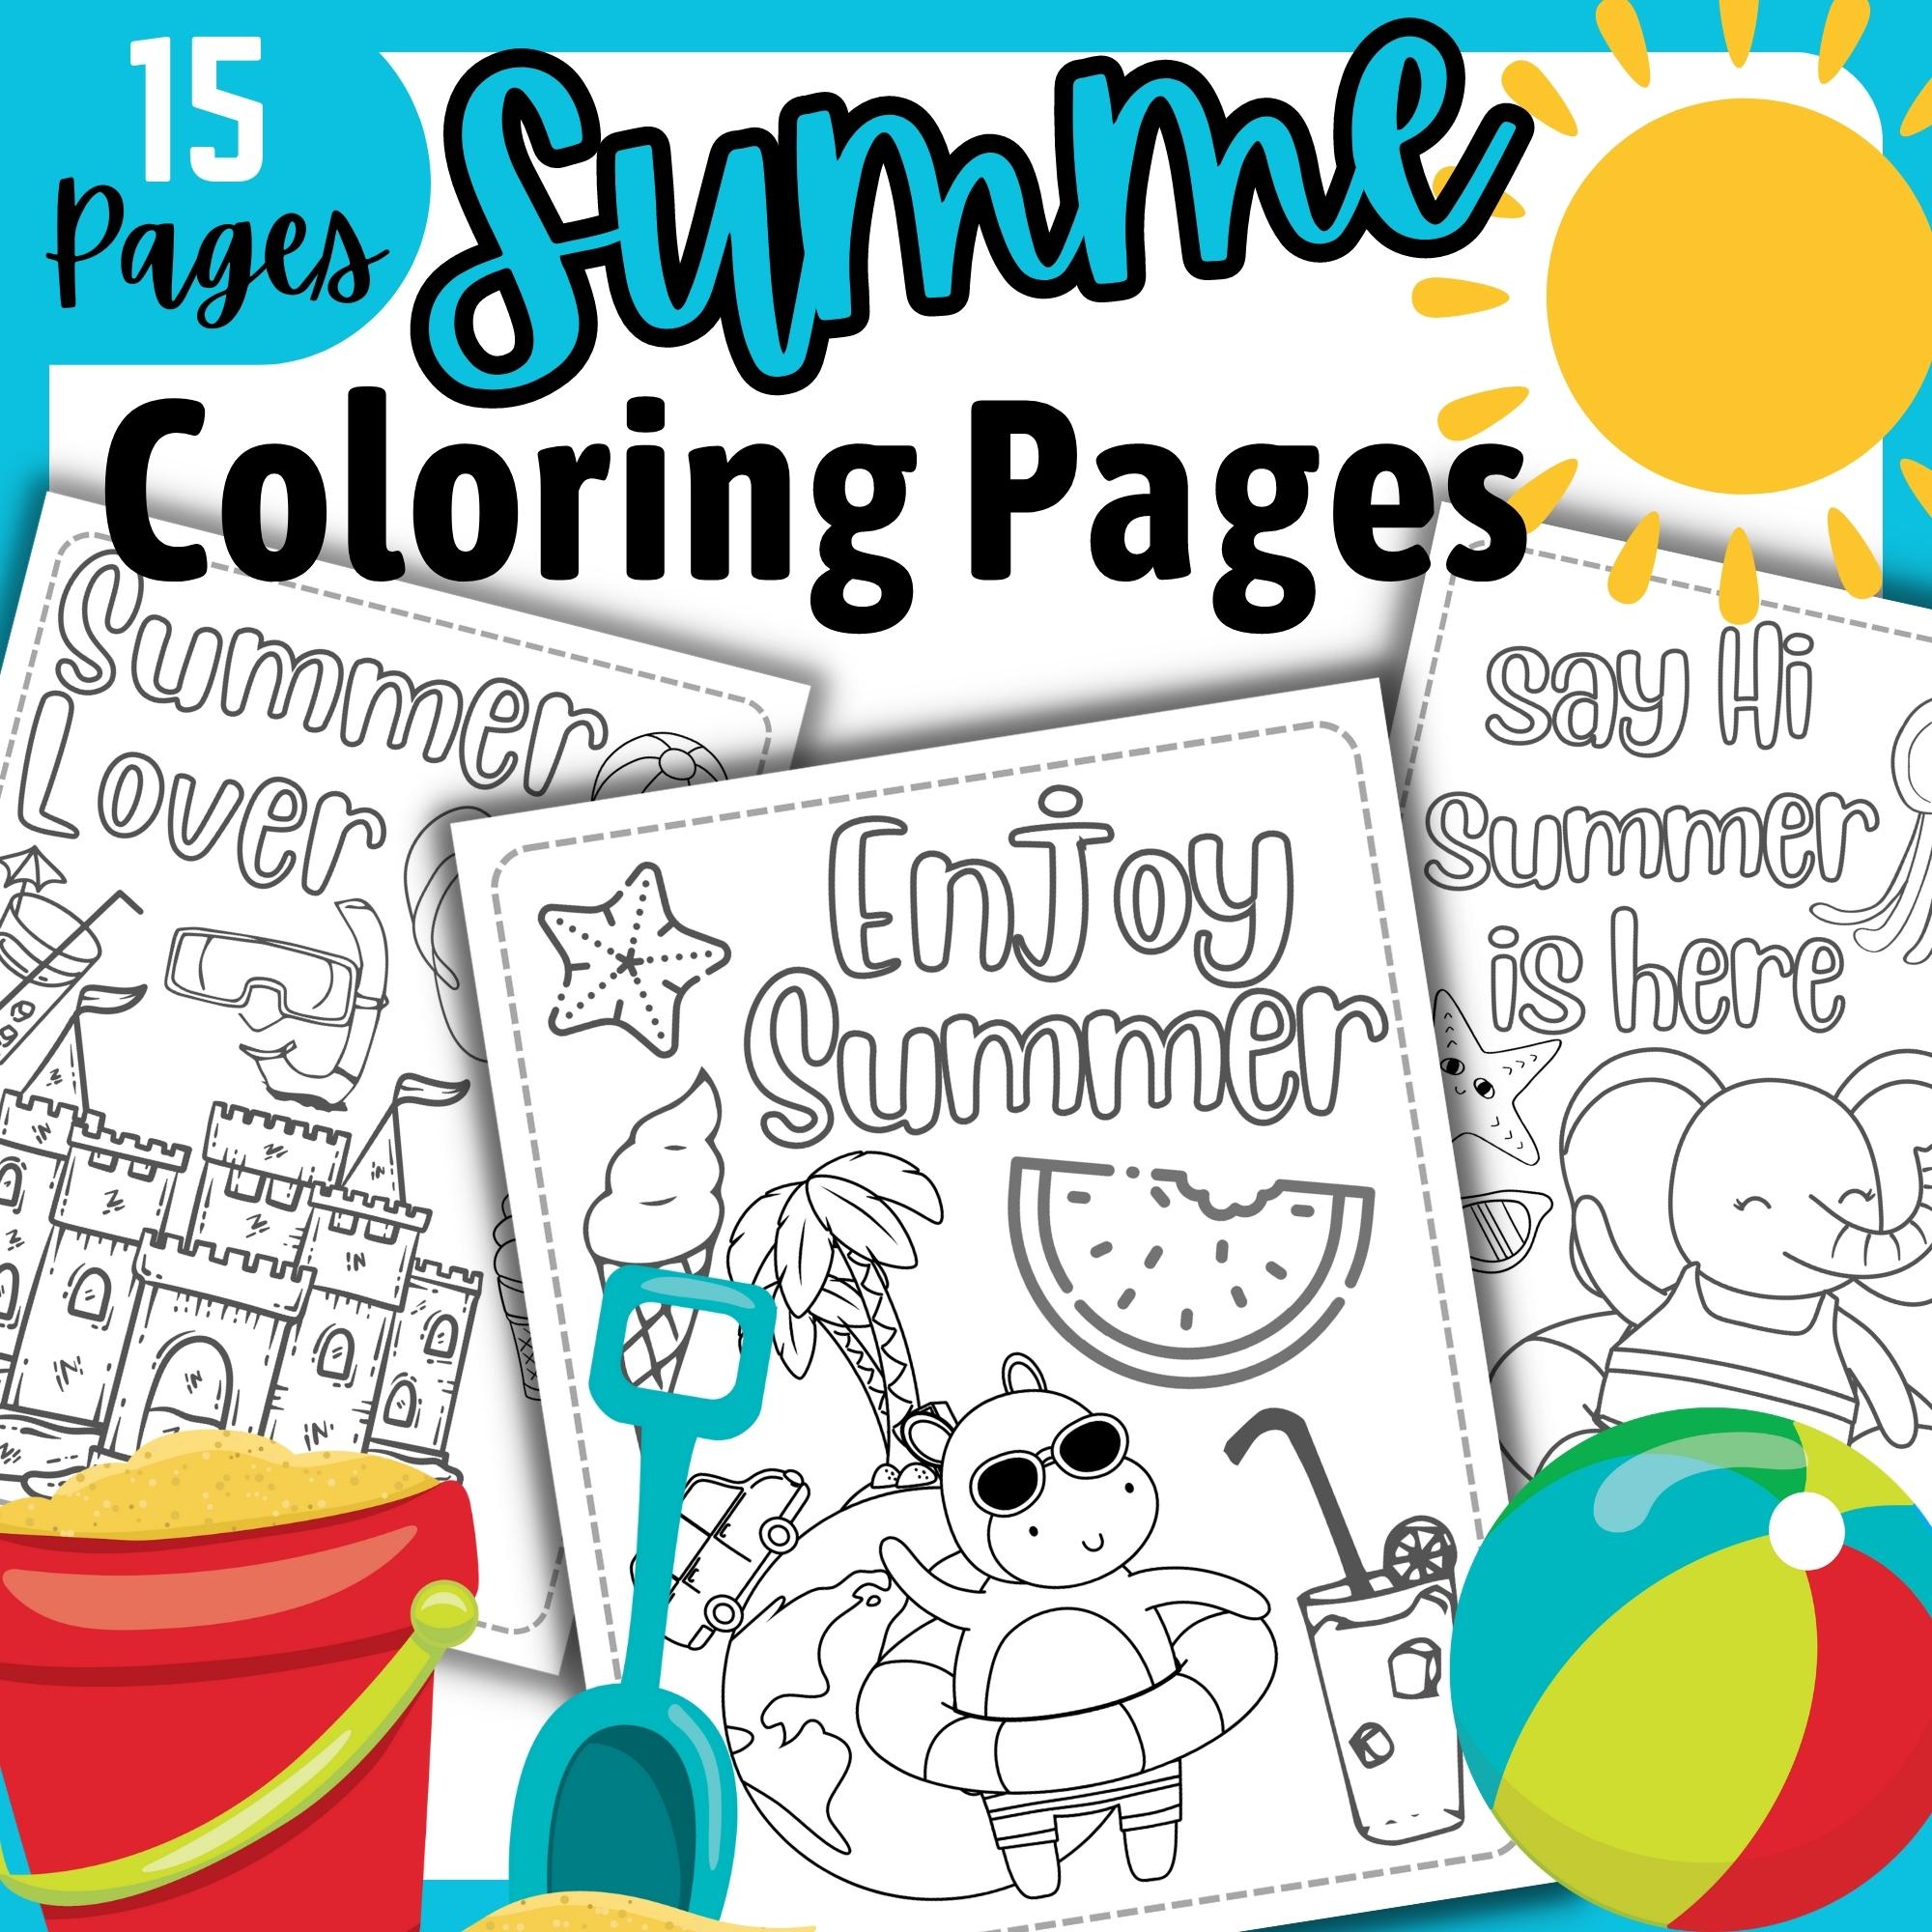 Summer coloring pages end of the year coloring sheets with quotes made by teachers